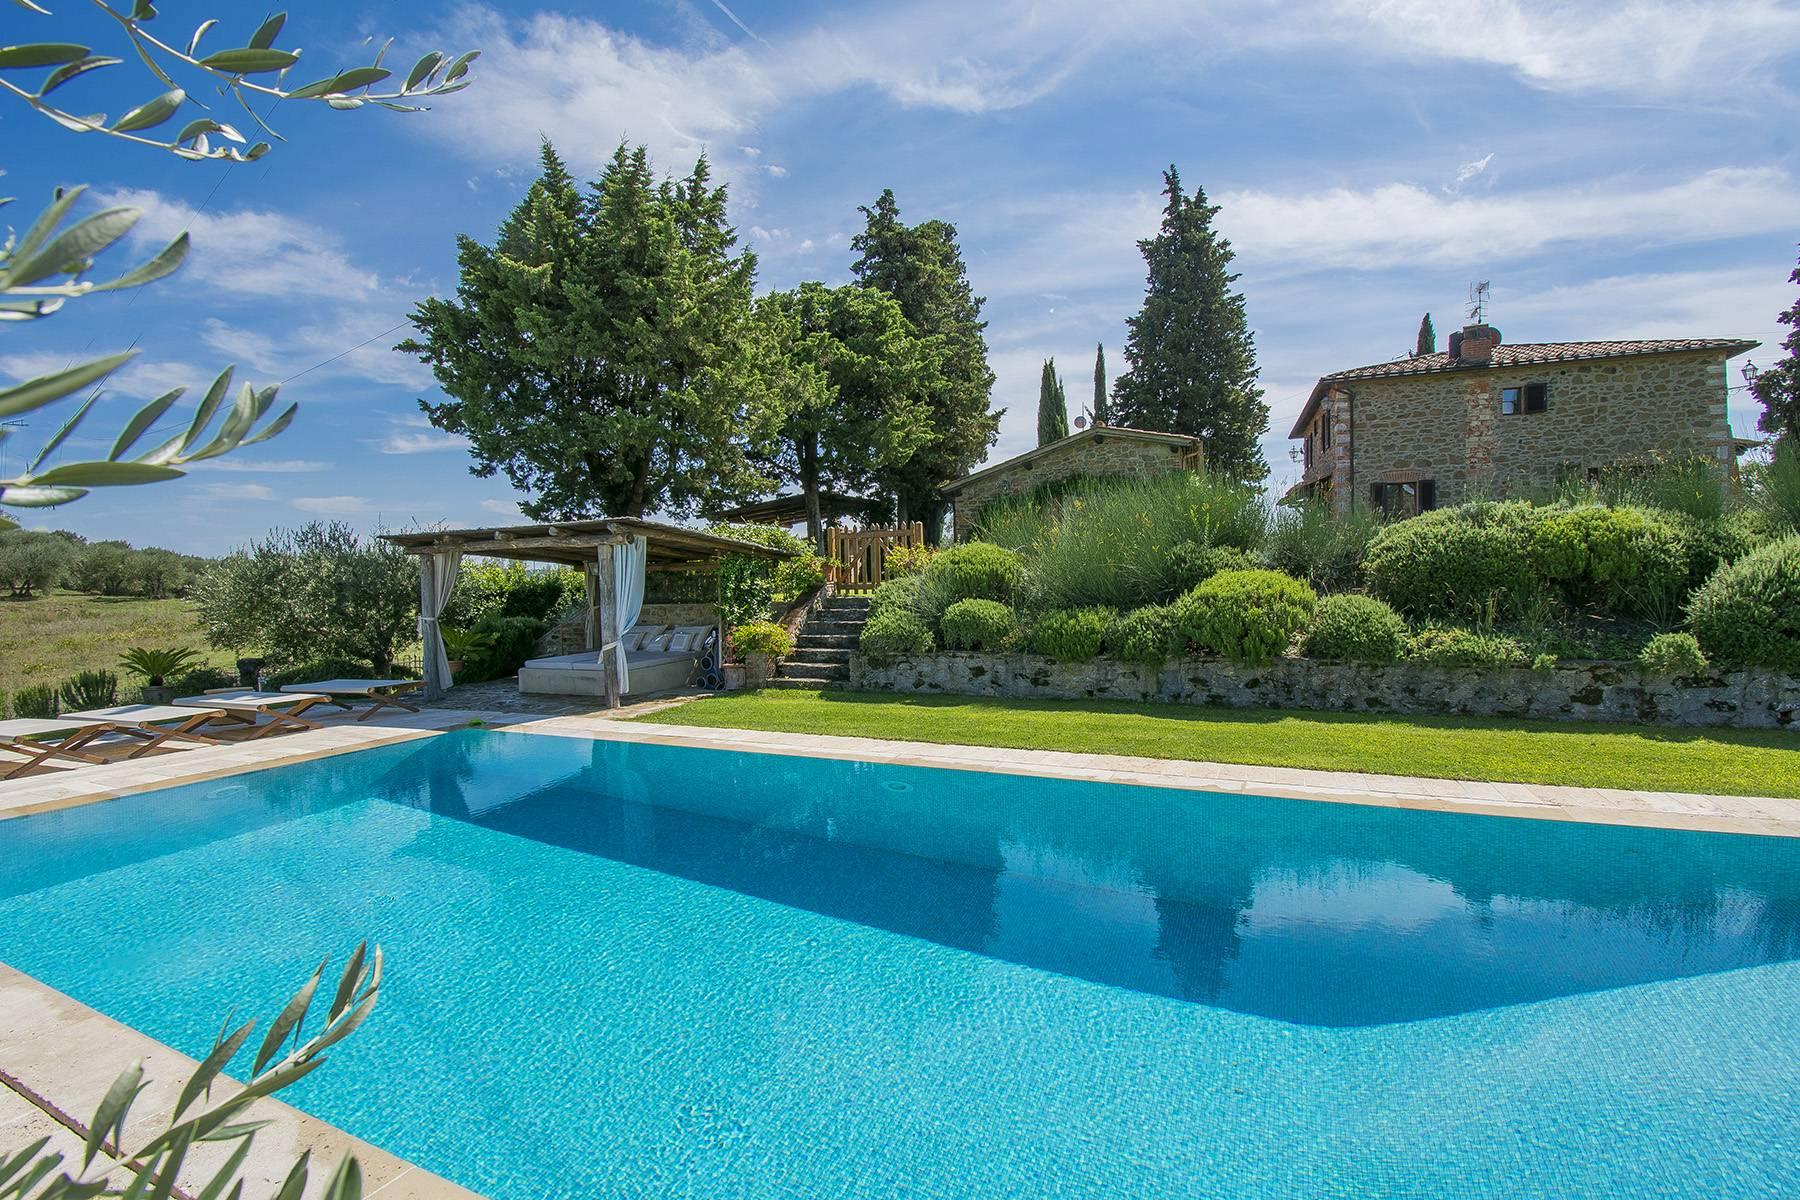 House in the Tuscan Hills for Sale - 28